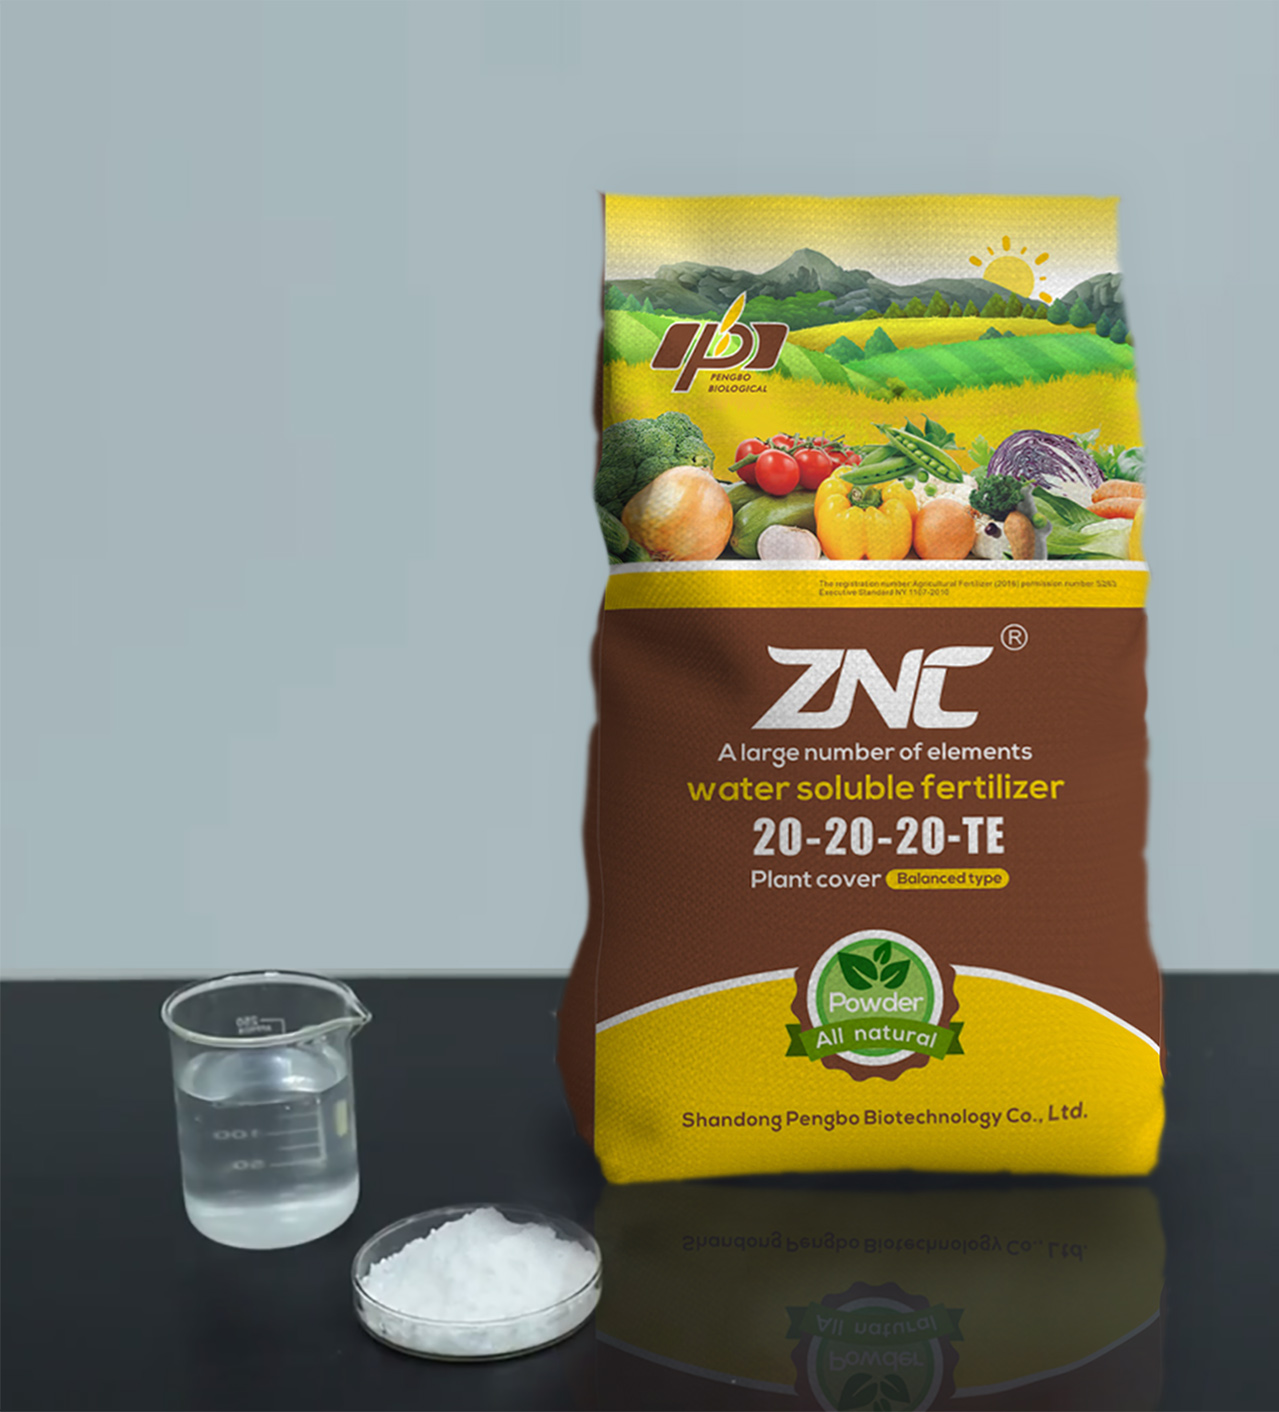 A large number of elements water soluble fertilizer - balance